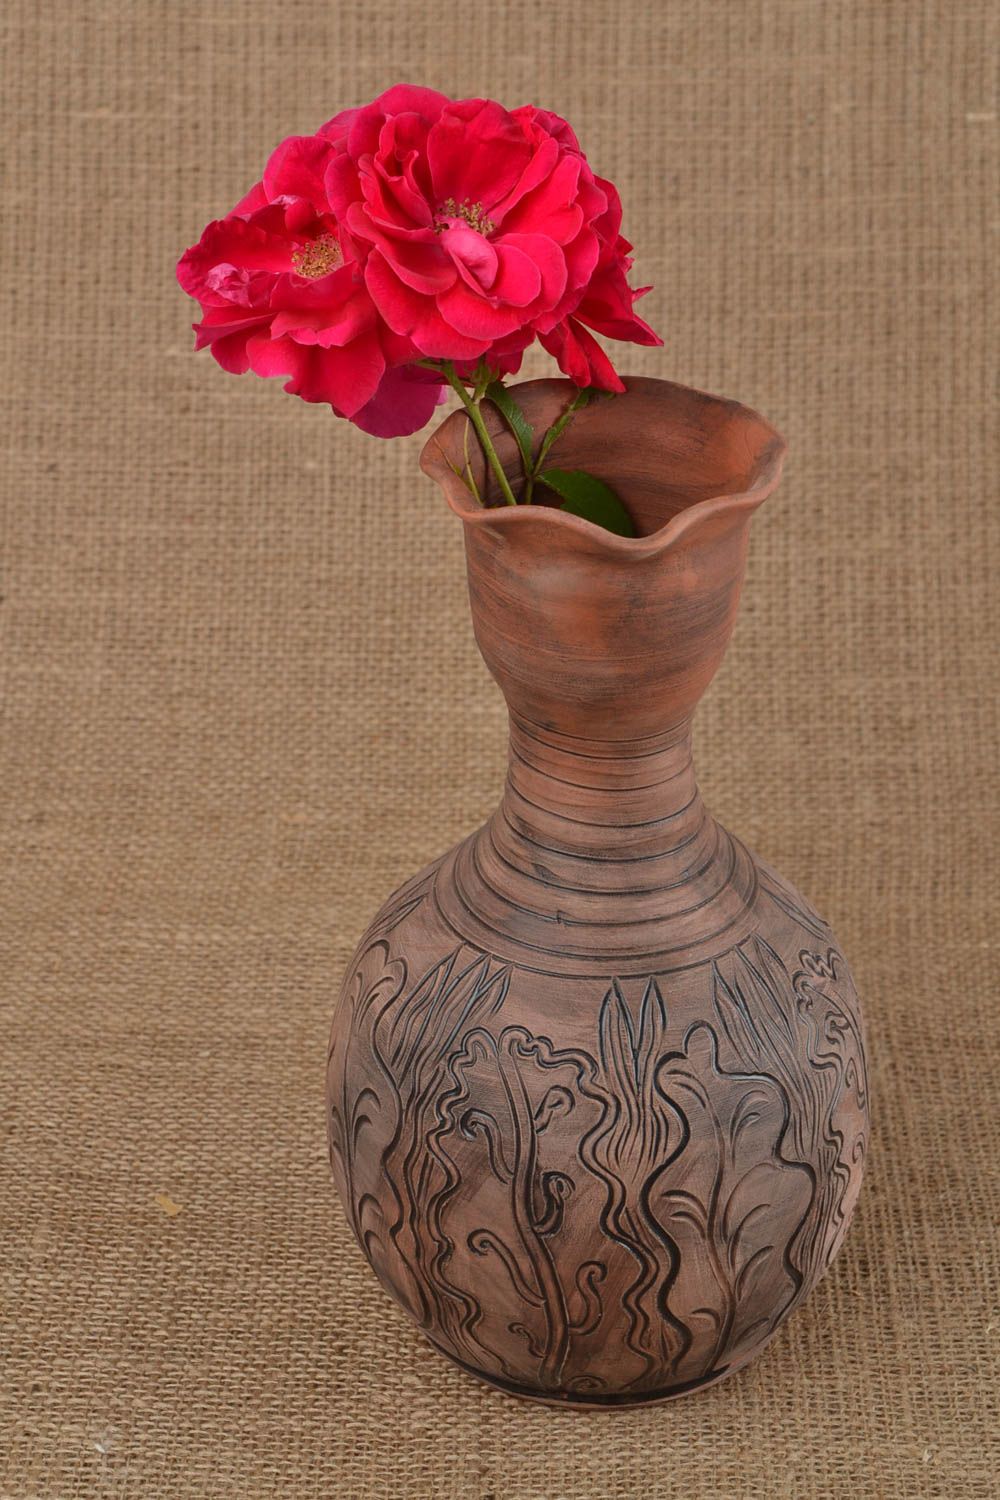 10 inches tall ceramic flower vase 2 lb in ethnic style 2 lb photo 1